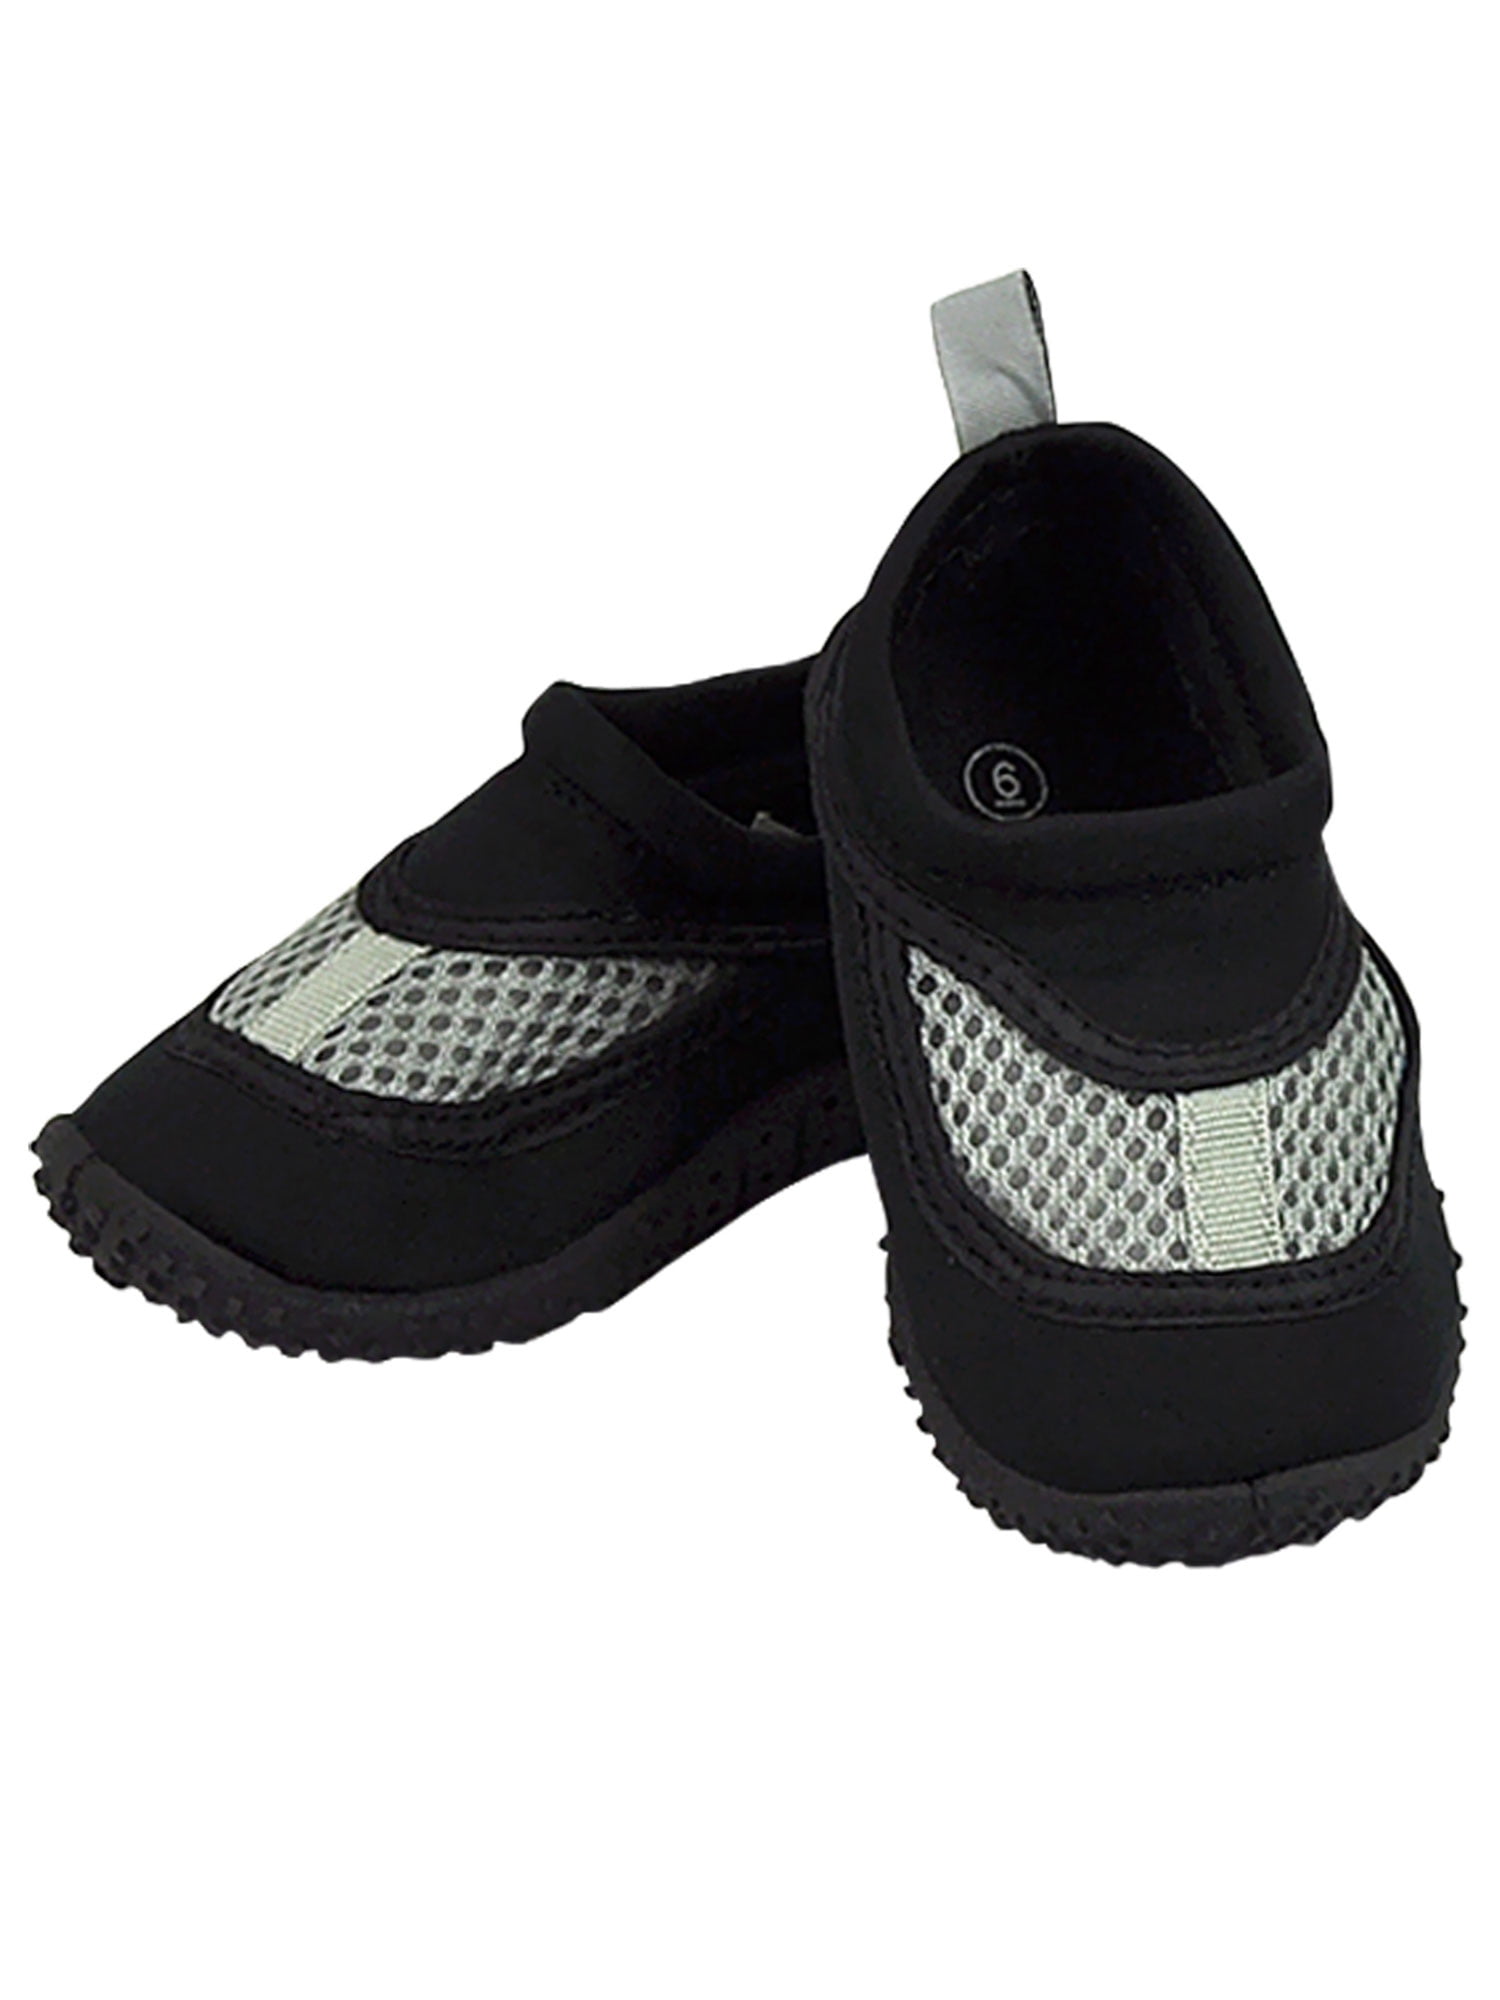 water shoes size 6